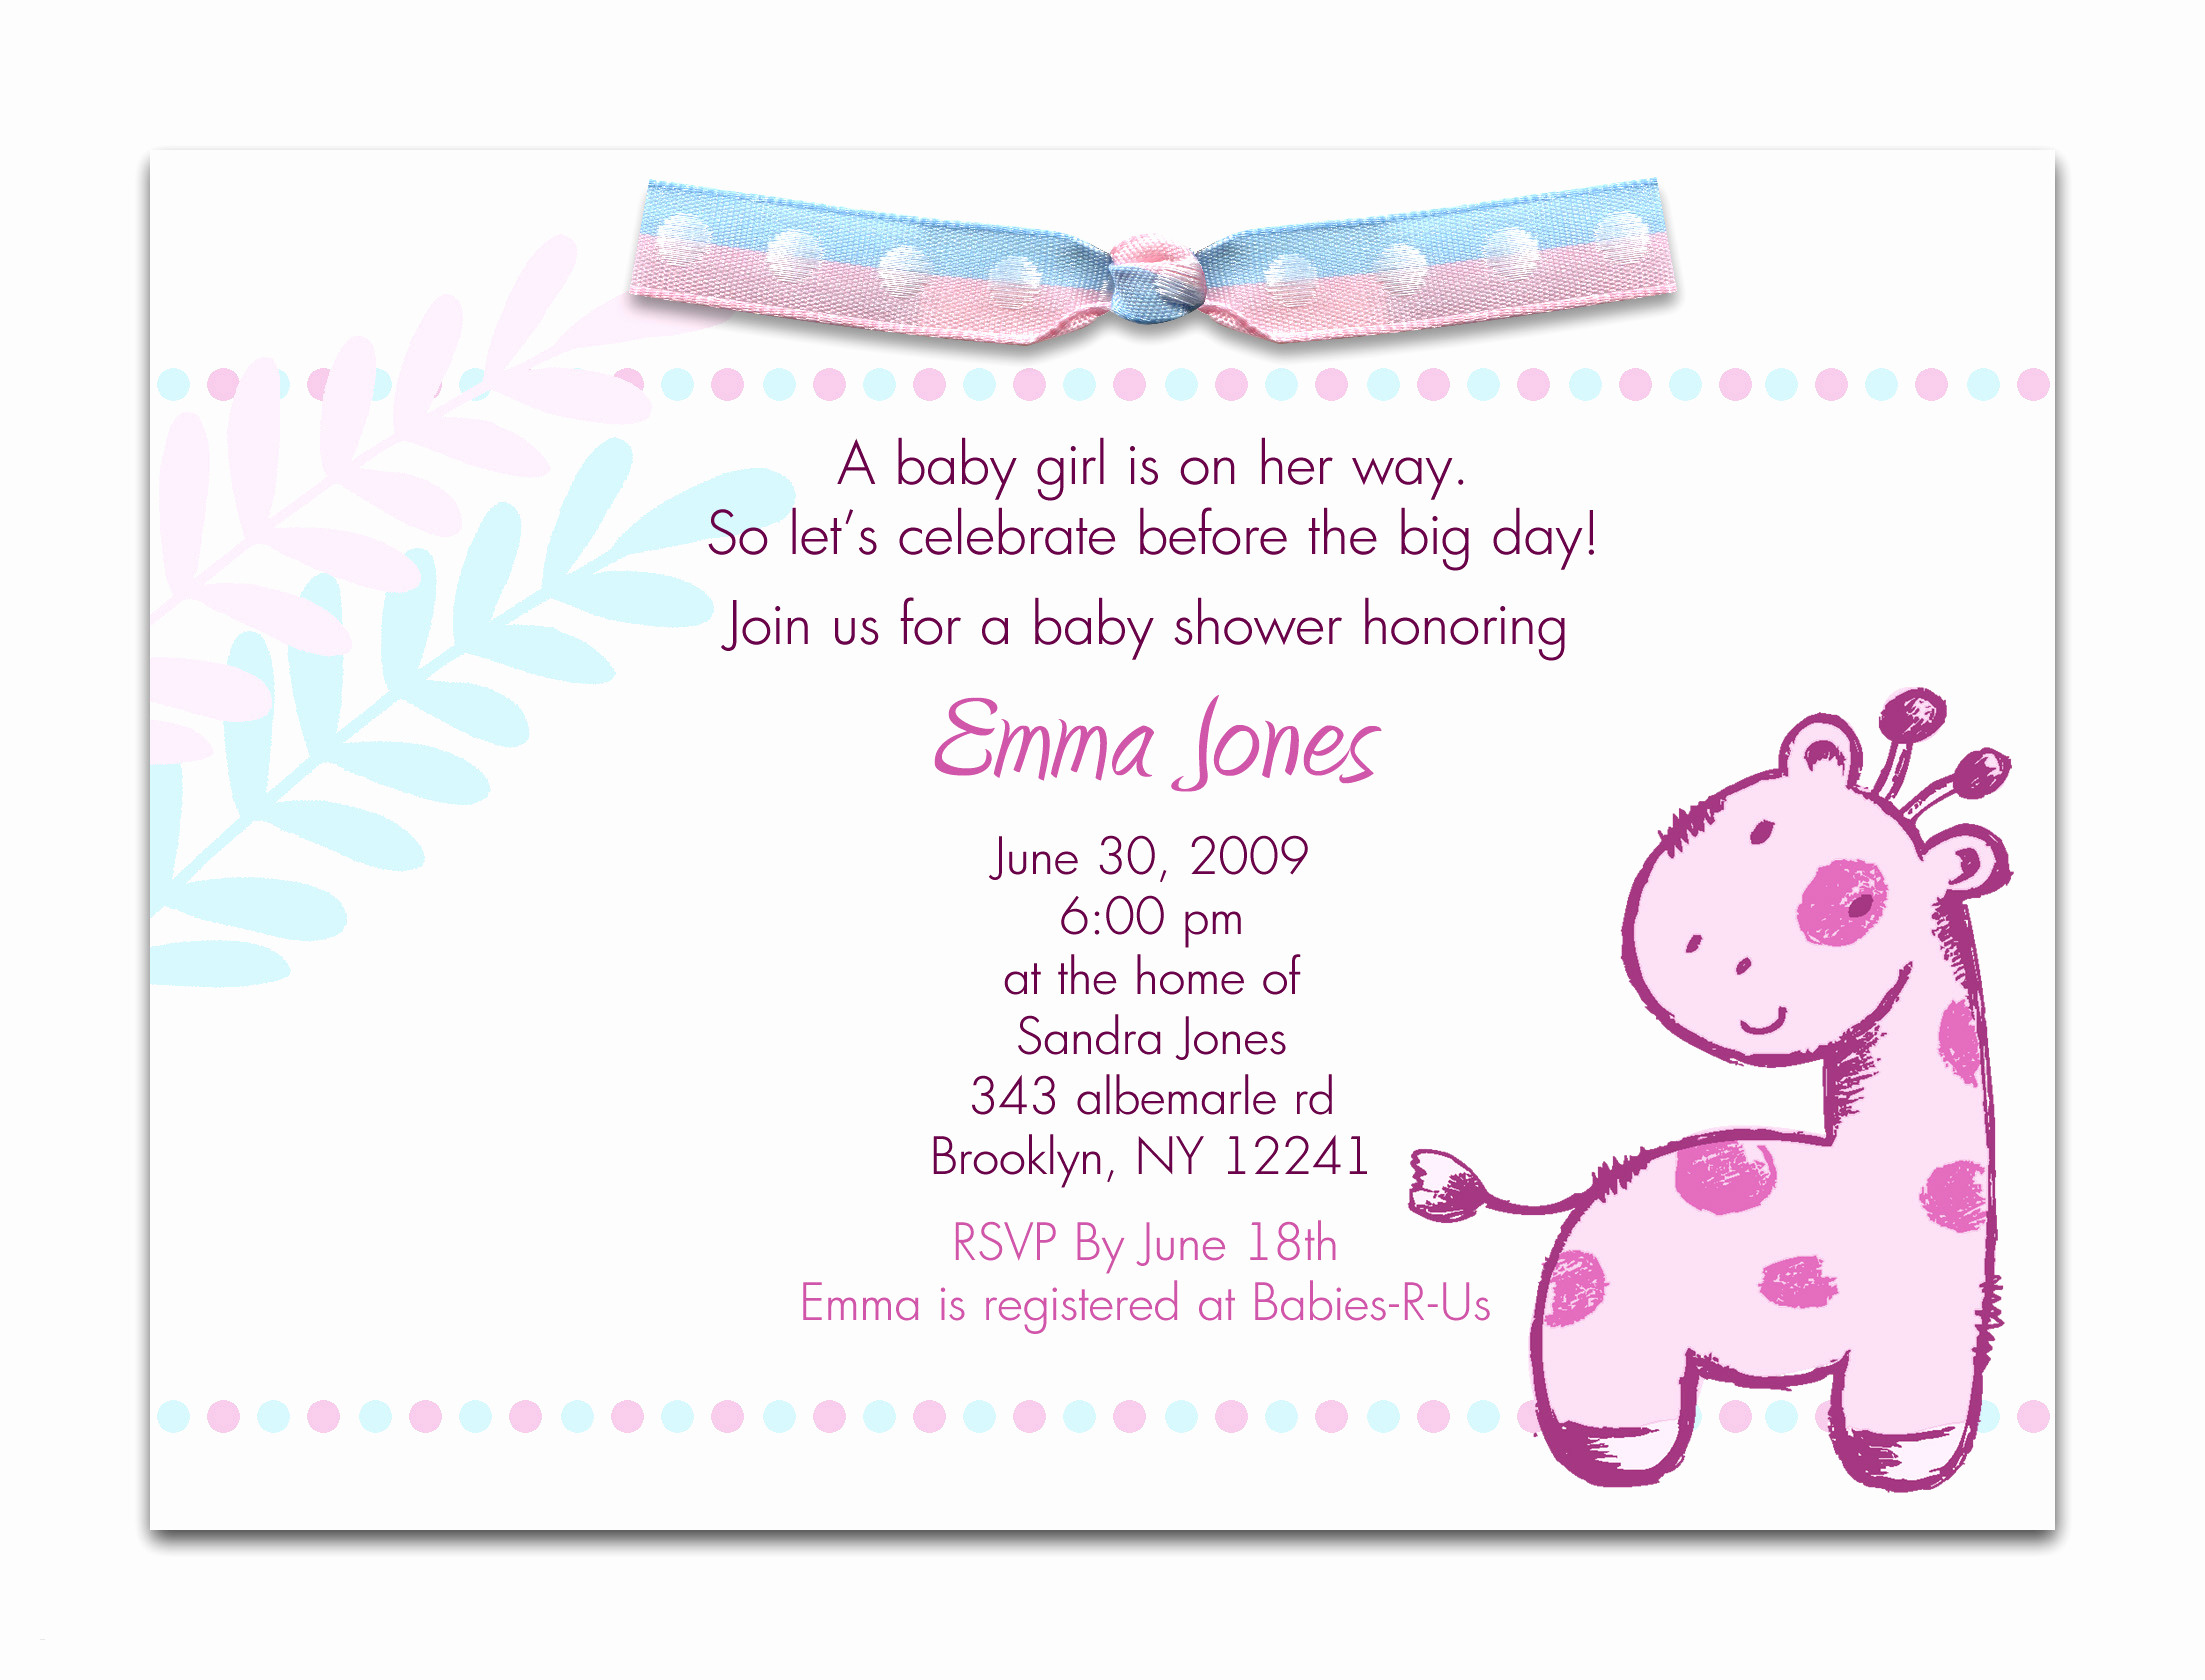 Full Size of Baby Shower:delightful Baby Shower Invitation Wording Picture Designs Baby Shower Invitation Wording As Well As Baby Shower Quotes With Baby Shower Notes Plus Baby Favors Together With Arreglos Baby Shower Niño